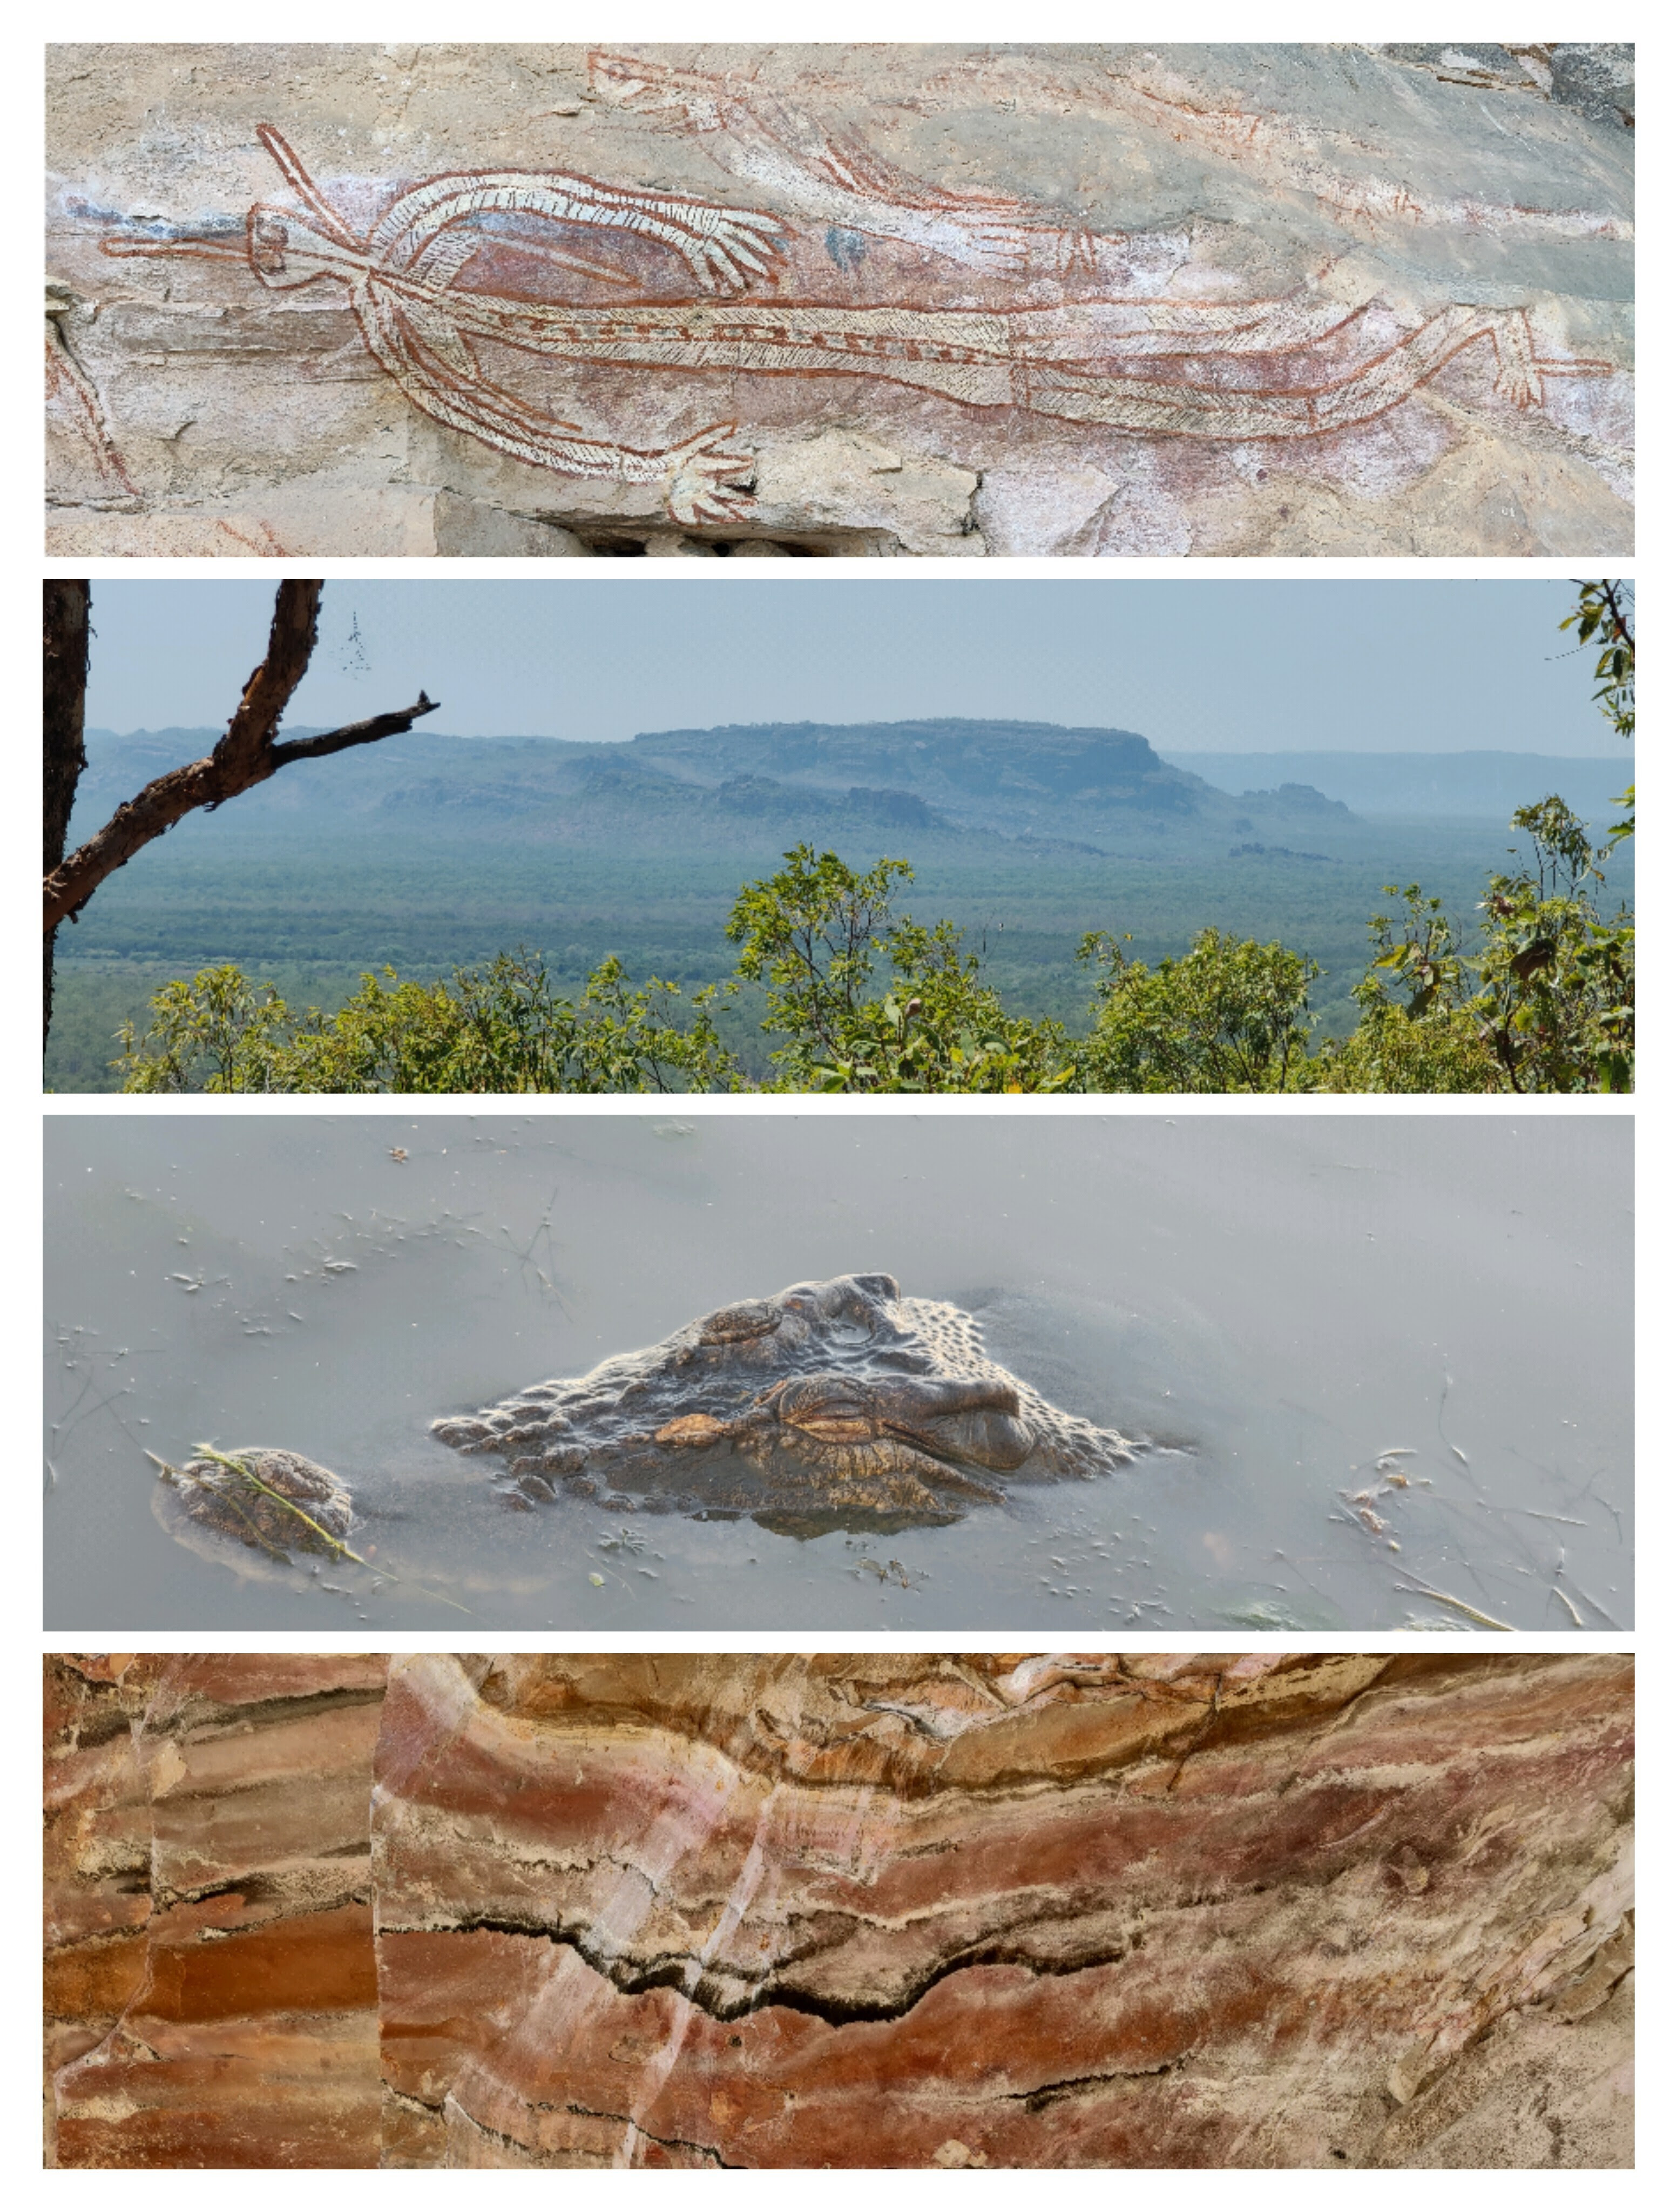 Picture: Some images captured from Kakadu National Park